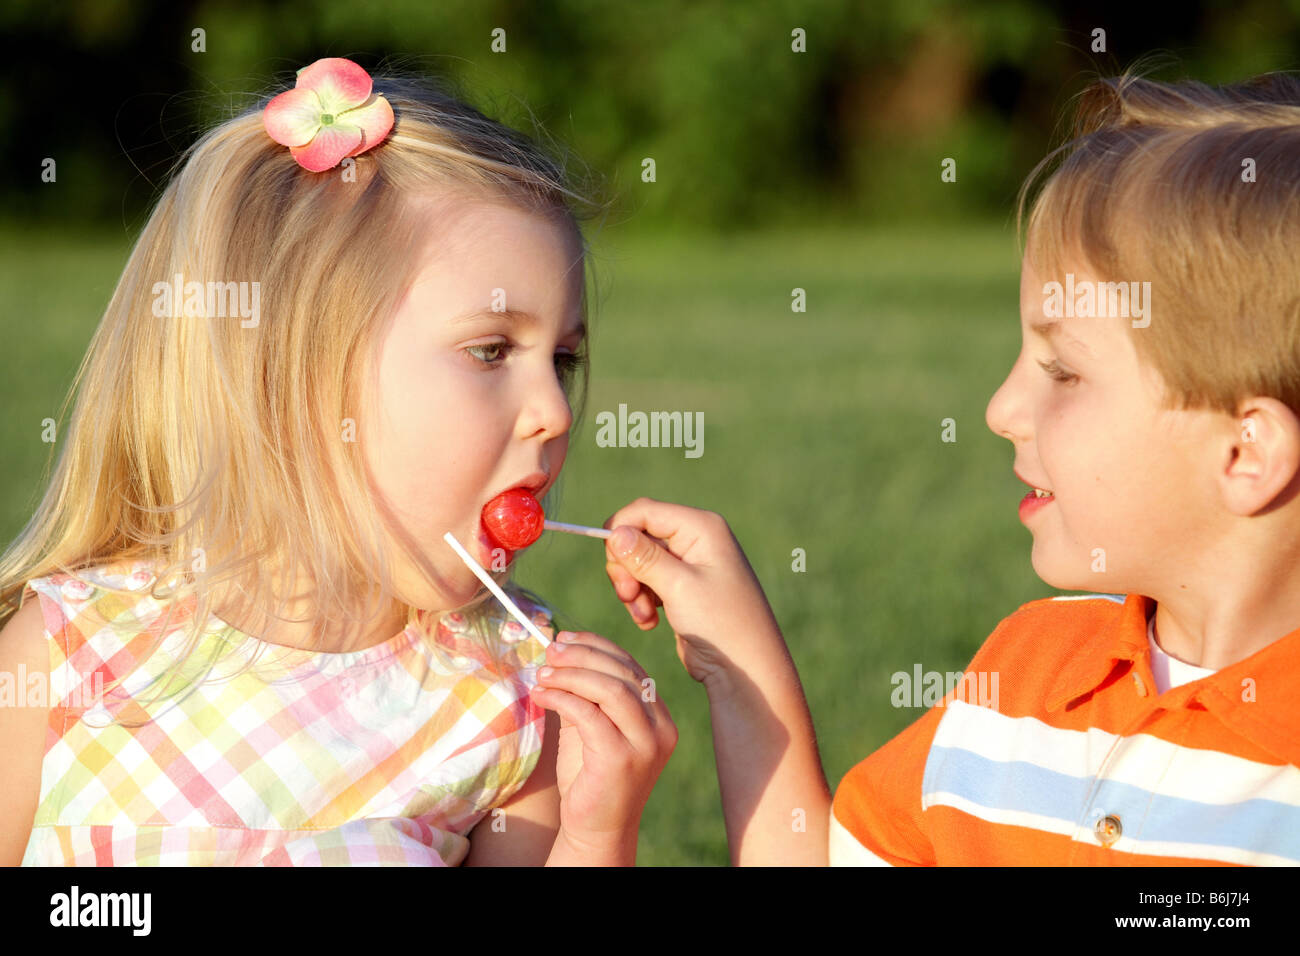 little boy and girl sharing a candy lollipop Stock Photo